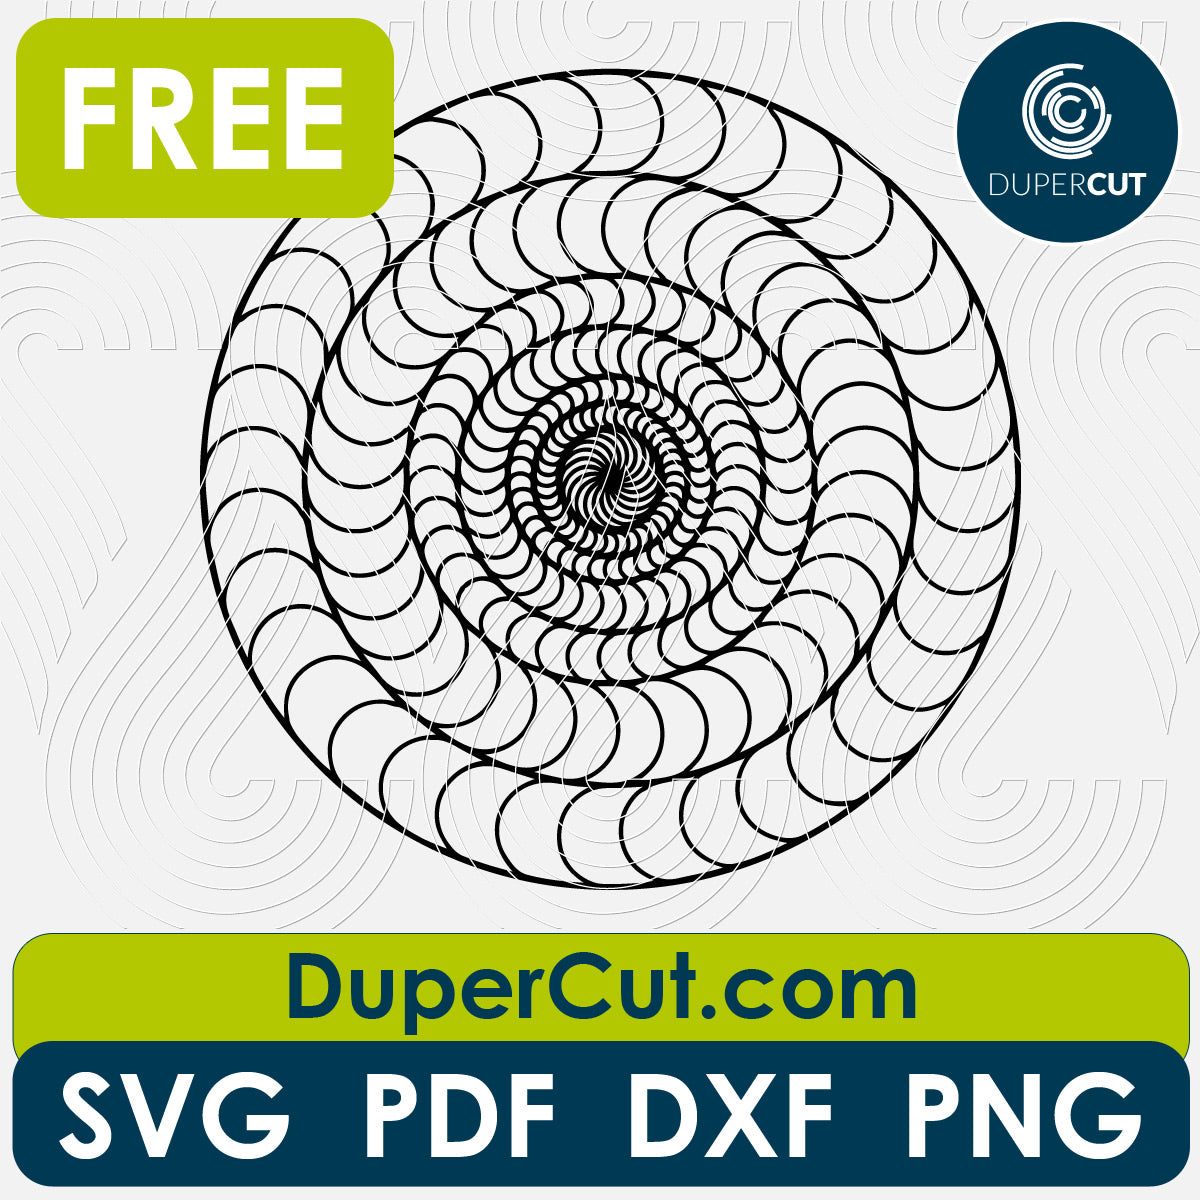 Optical illusion abstract black and white pattern - free SVG PNG DXF vector files for laser and blade cutting machines. Glowforge, Cricut, Silhouette cameo templates by DuperCut.com